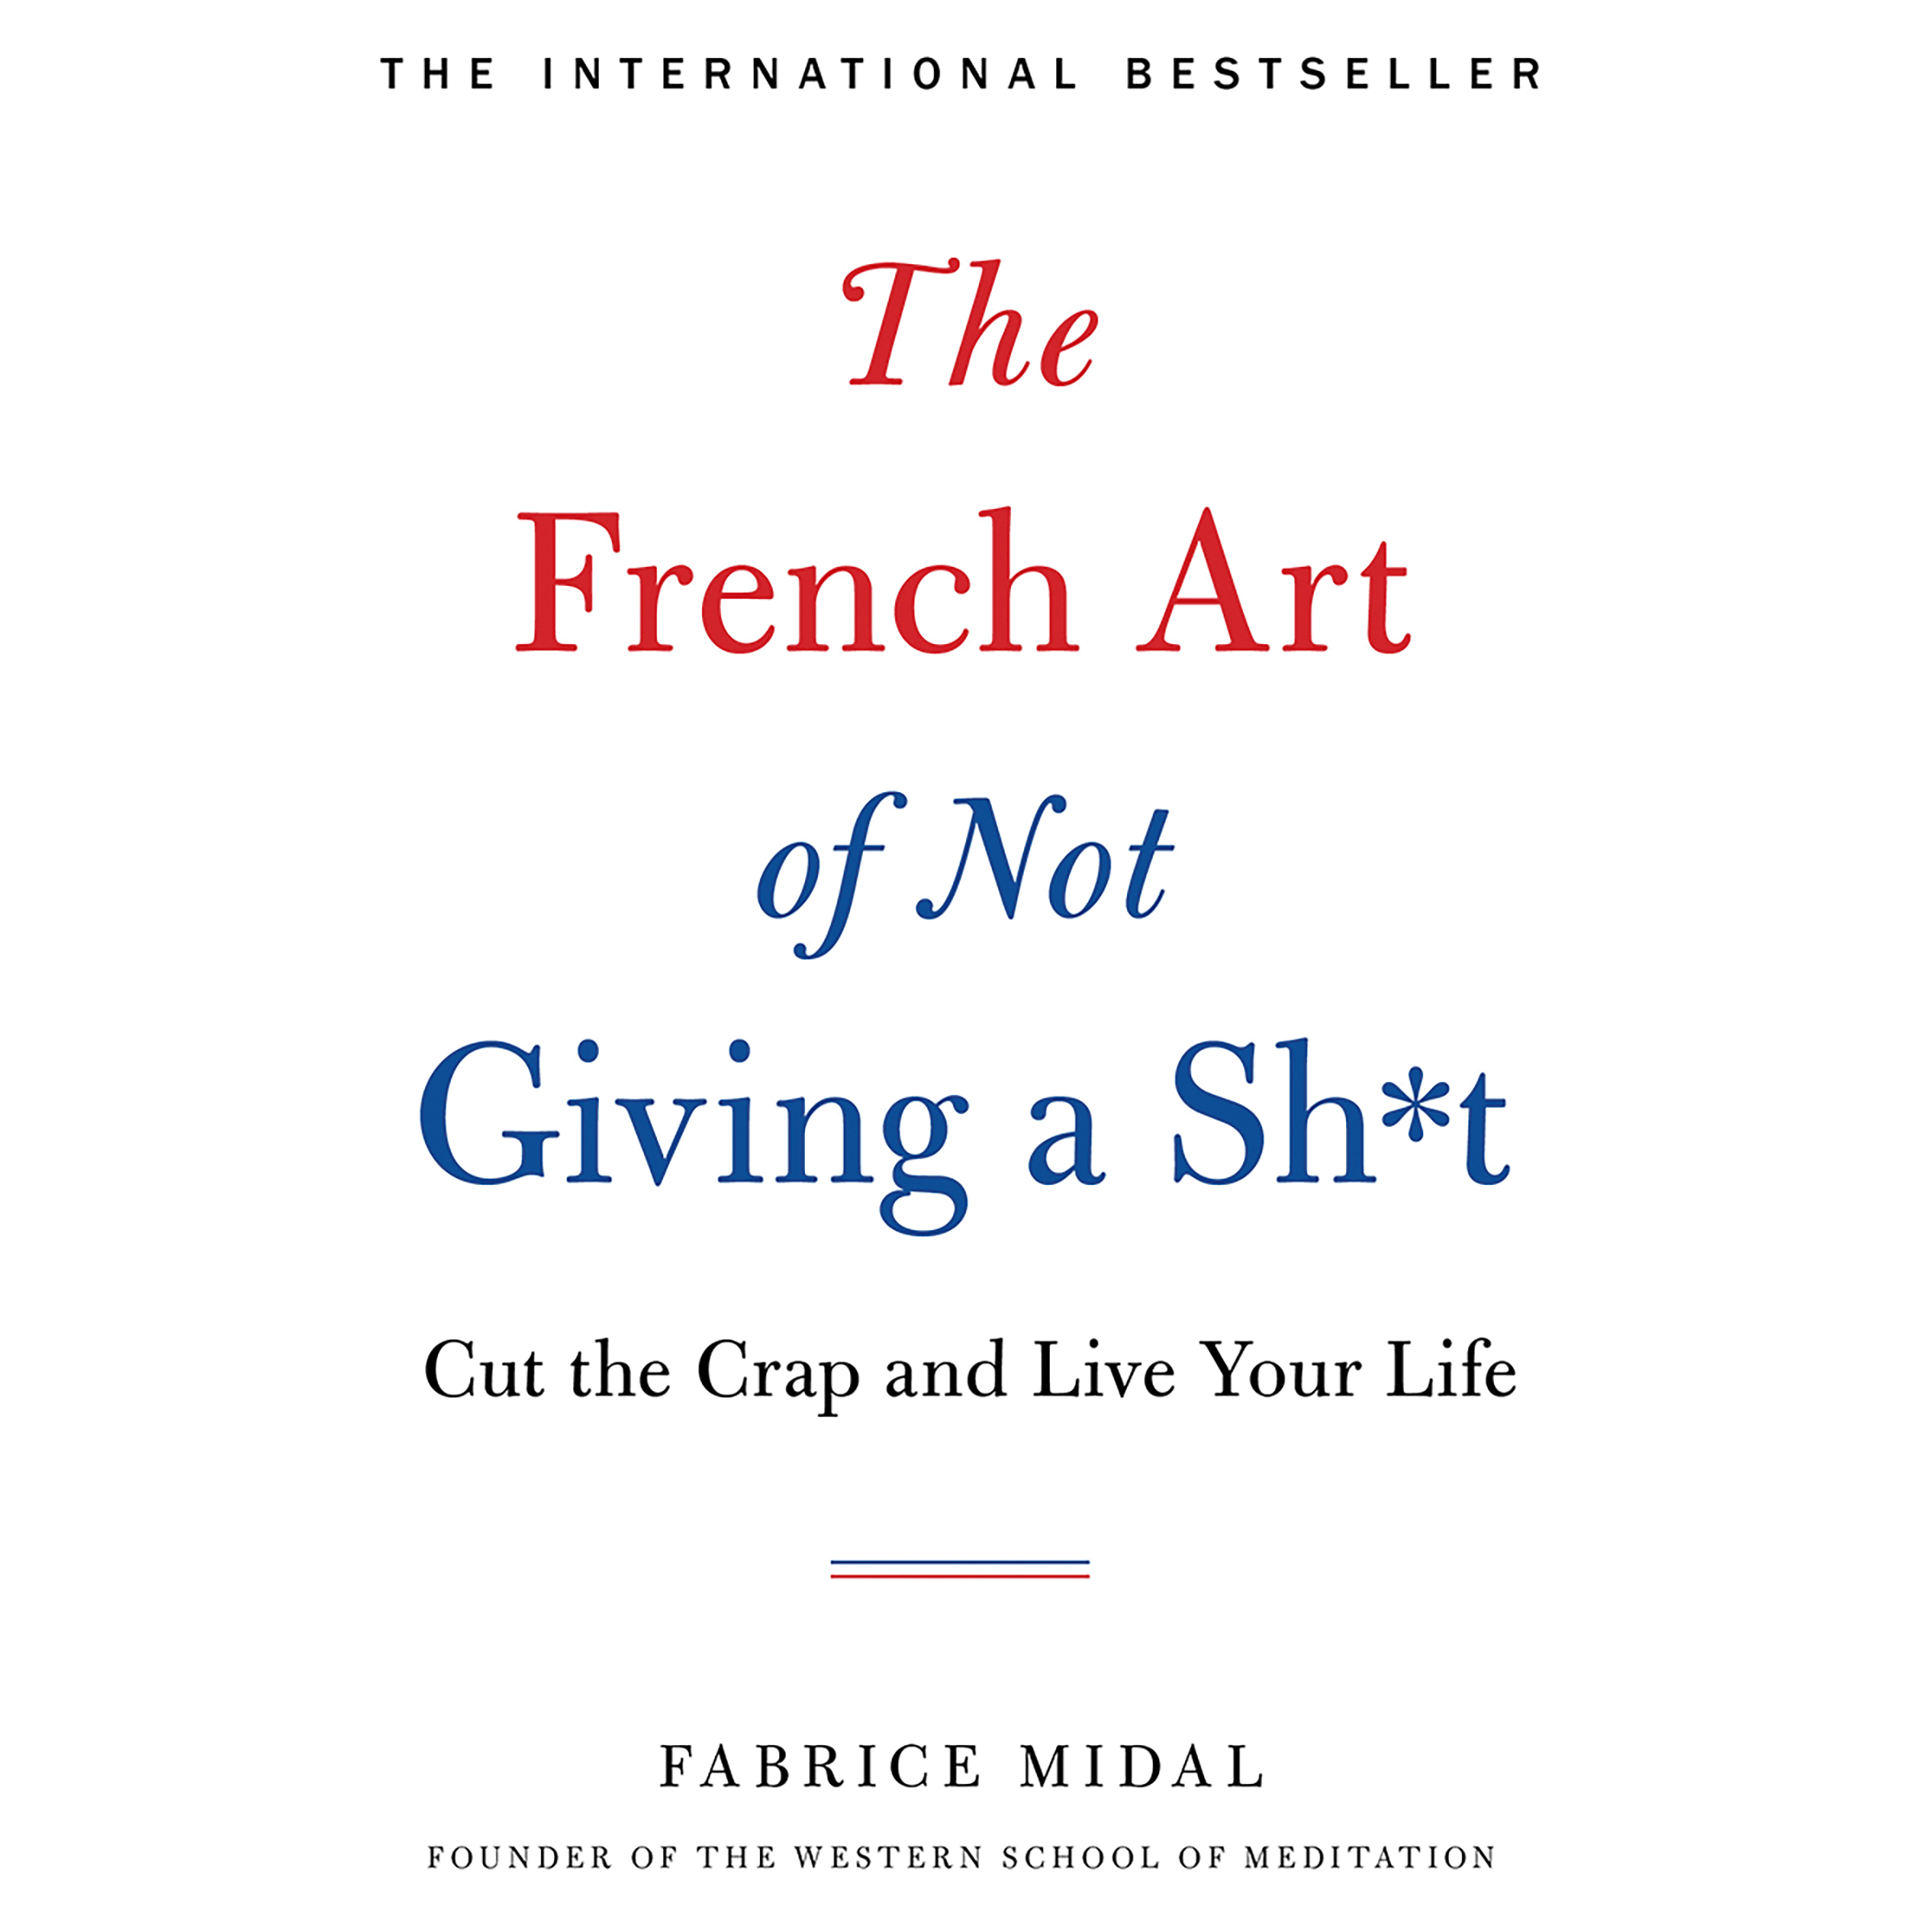 The French Art of not Giving a Sh*t.